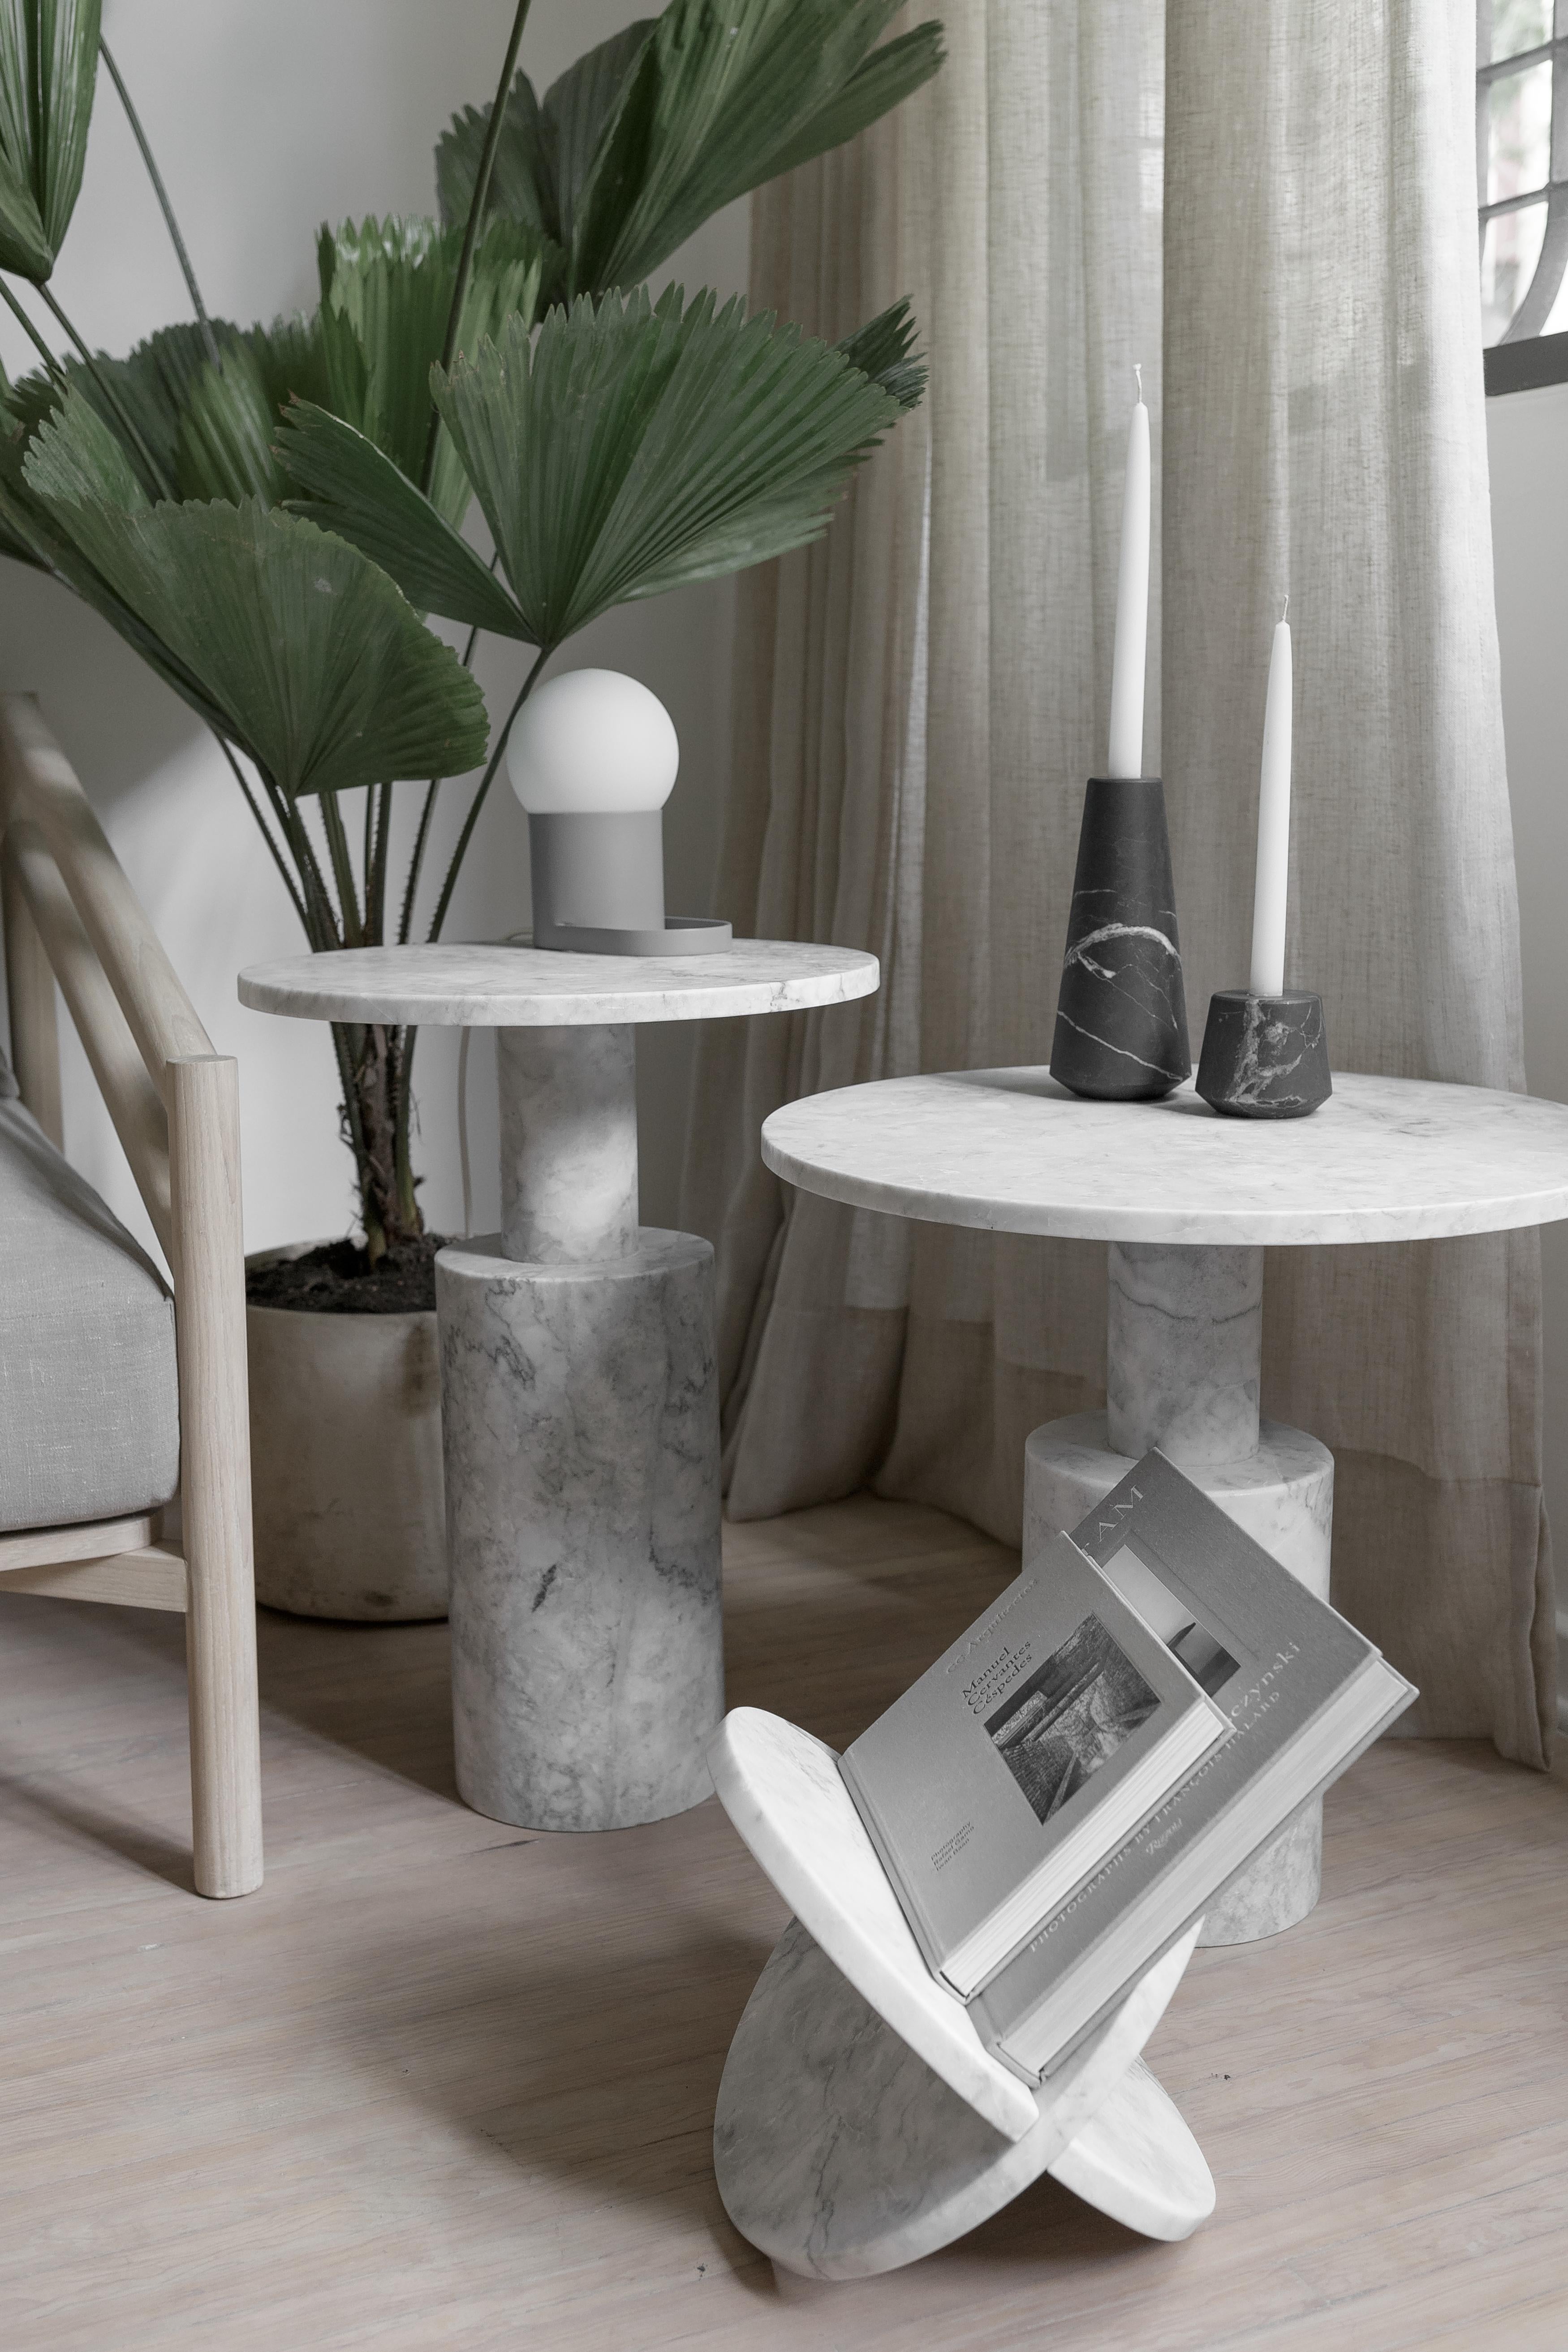 Side table in carved Veneciano white marble. Production time: 6-8 weeks for items without marble / 13-14 weeks for marble pieces. Shipping +10 additional business days. Casa Quieta uses natural materials such as woods, stones, fabrics etc. These